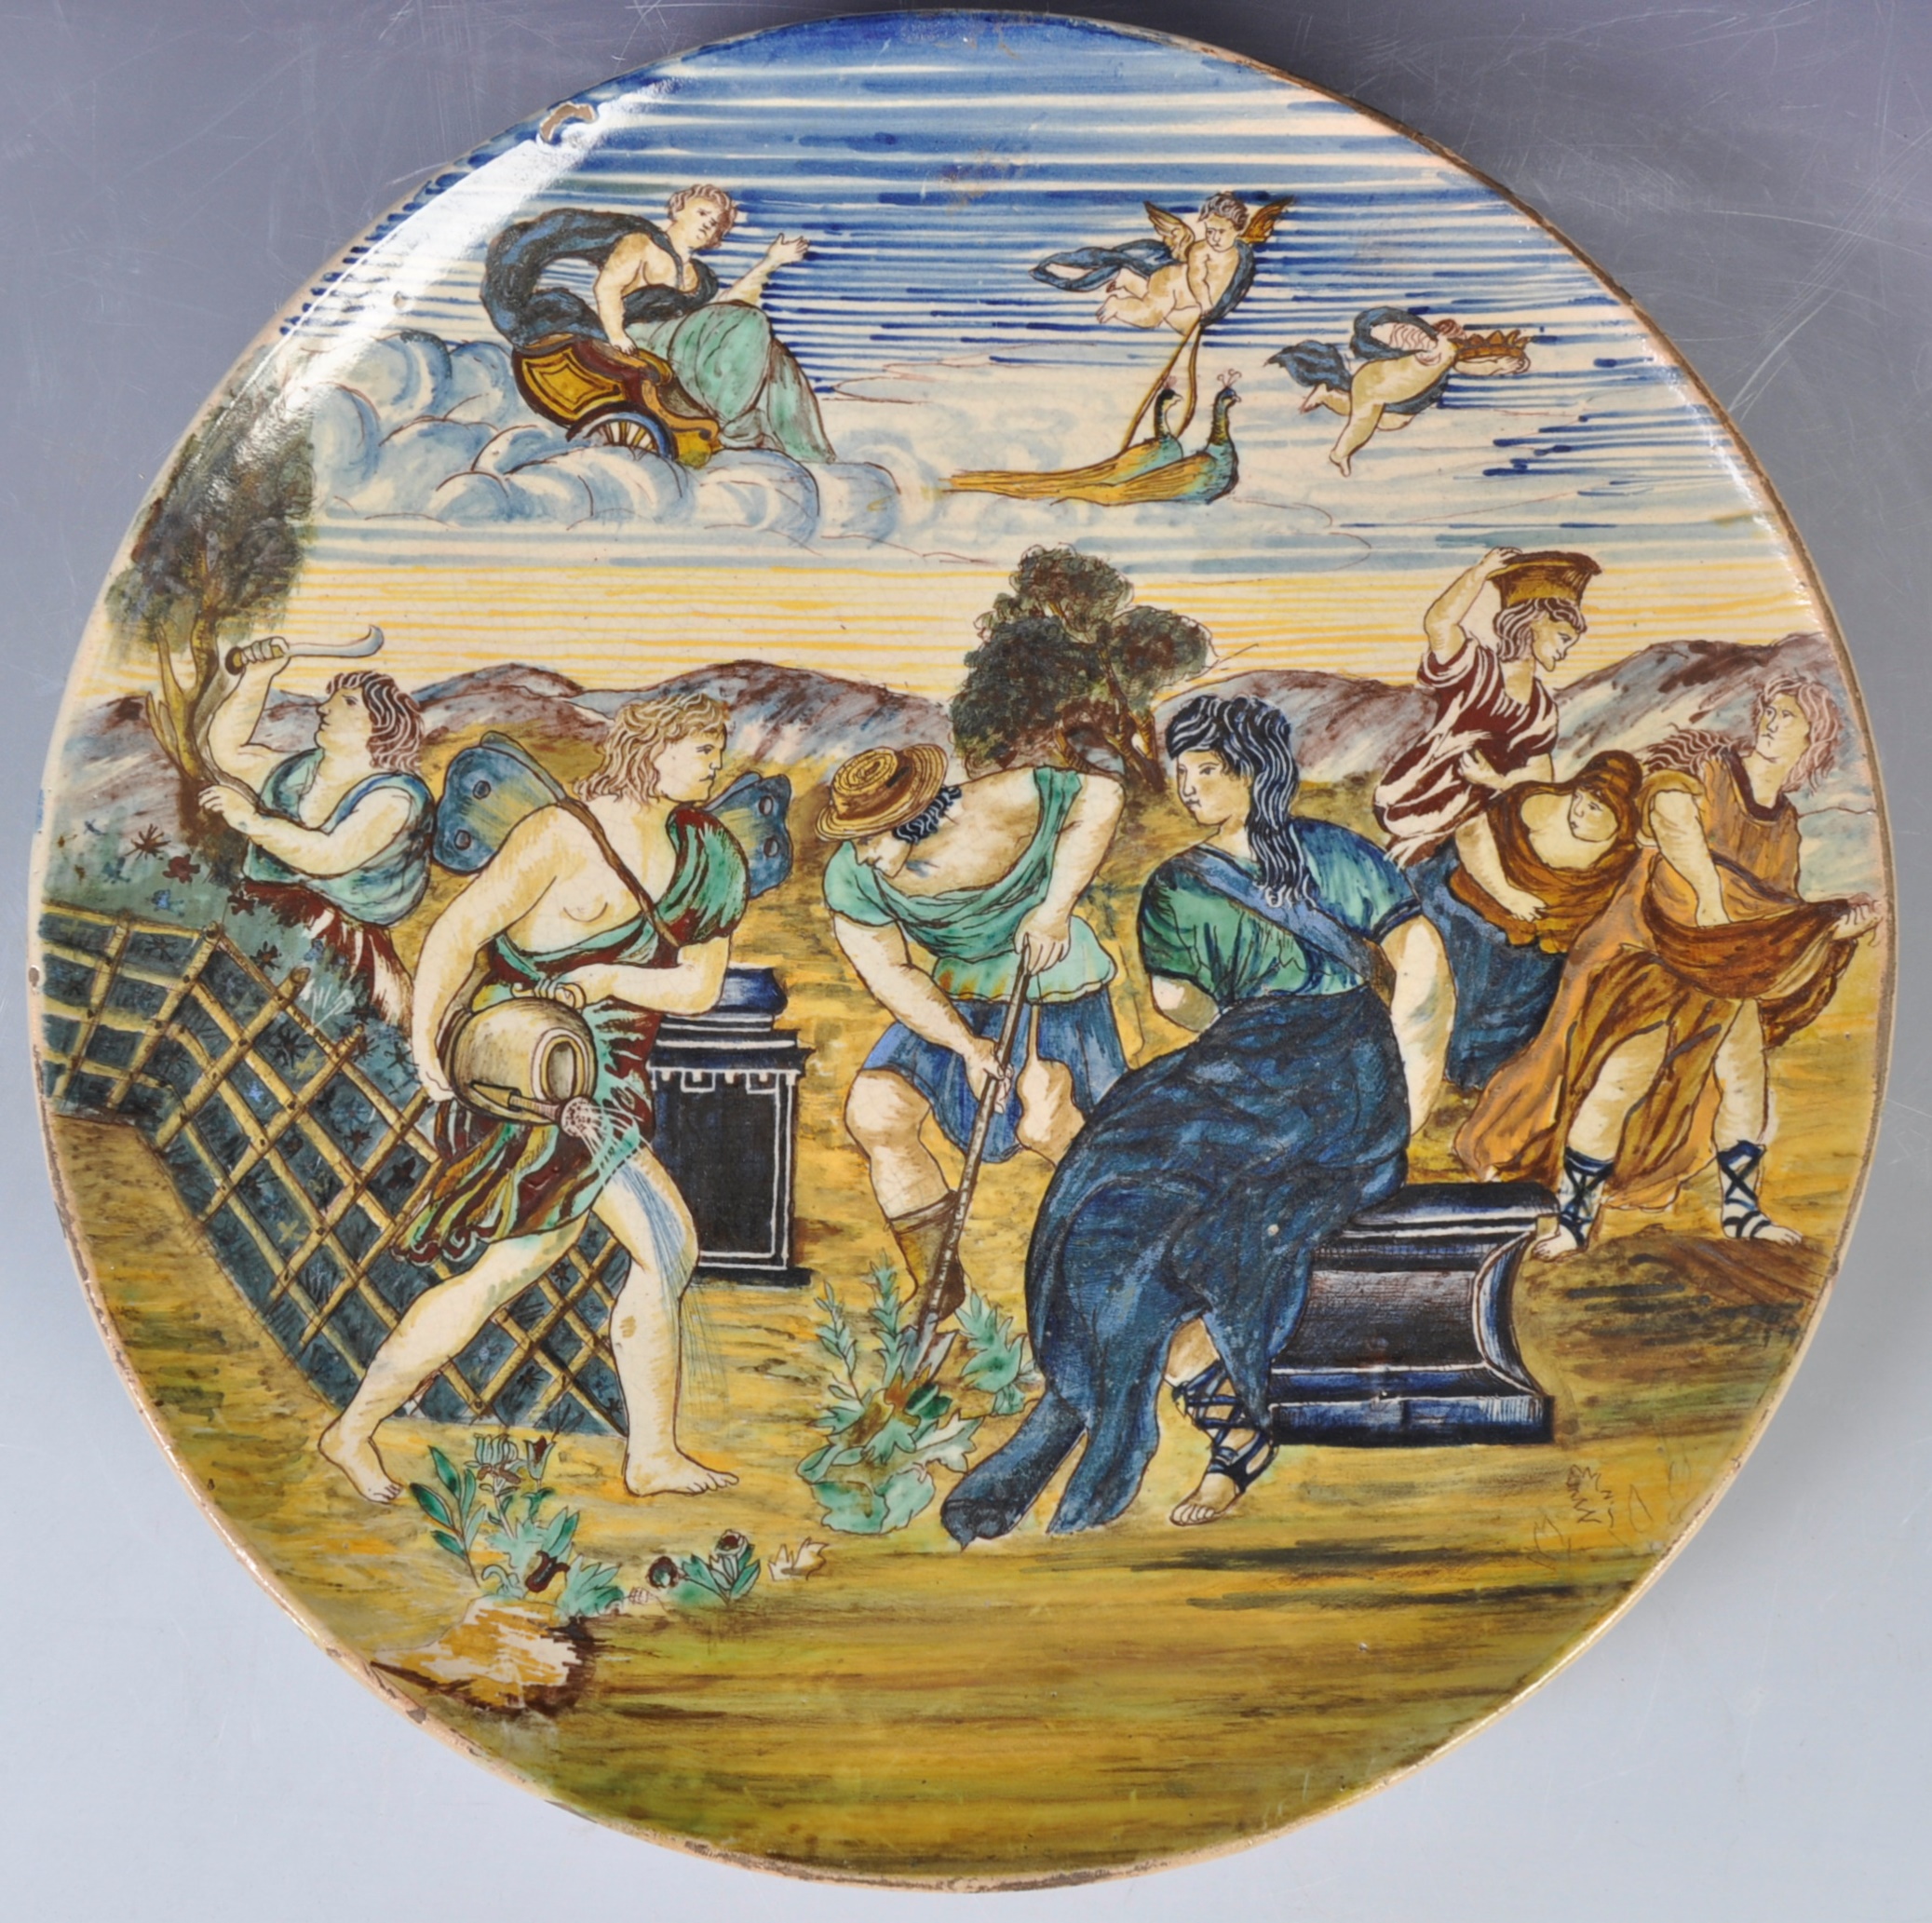 ANTIQUE ITALIAN MAIOLICA CHARGER WITH CLASSICAL SCENES